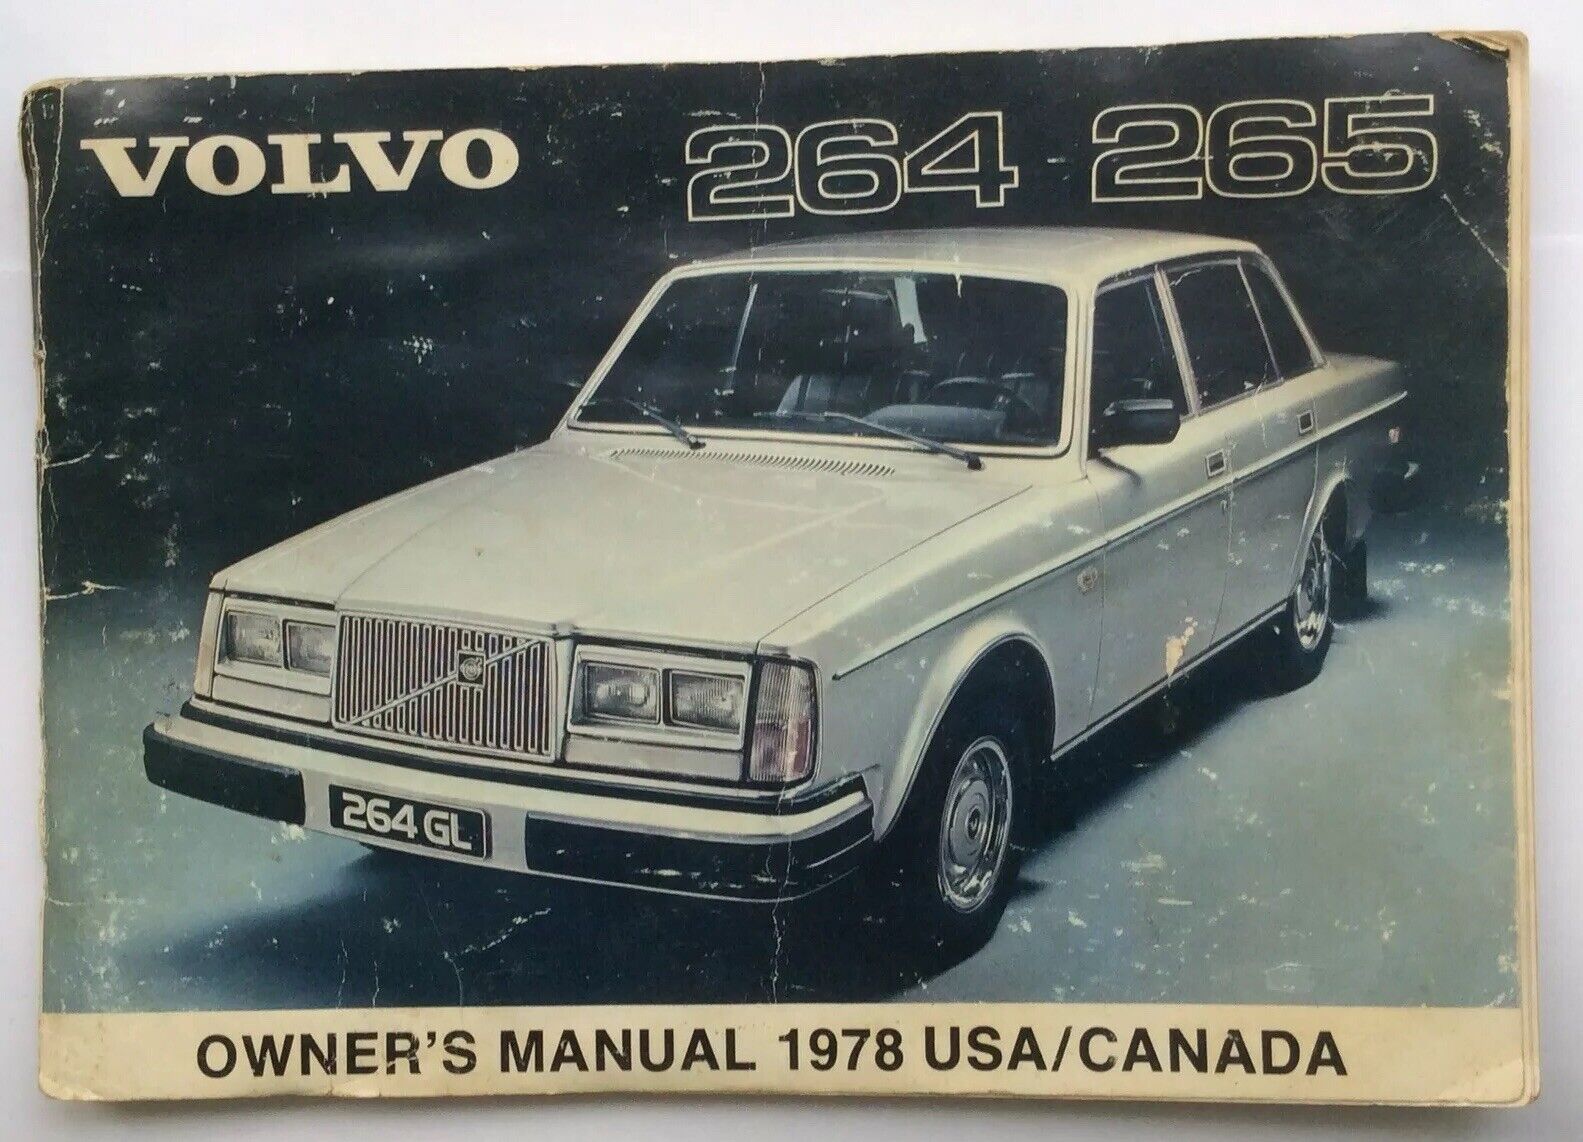 1978 Volvo Owners Manual 264 & 265